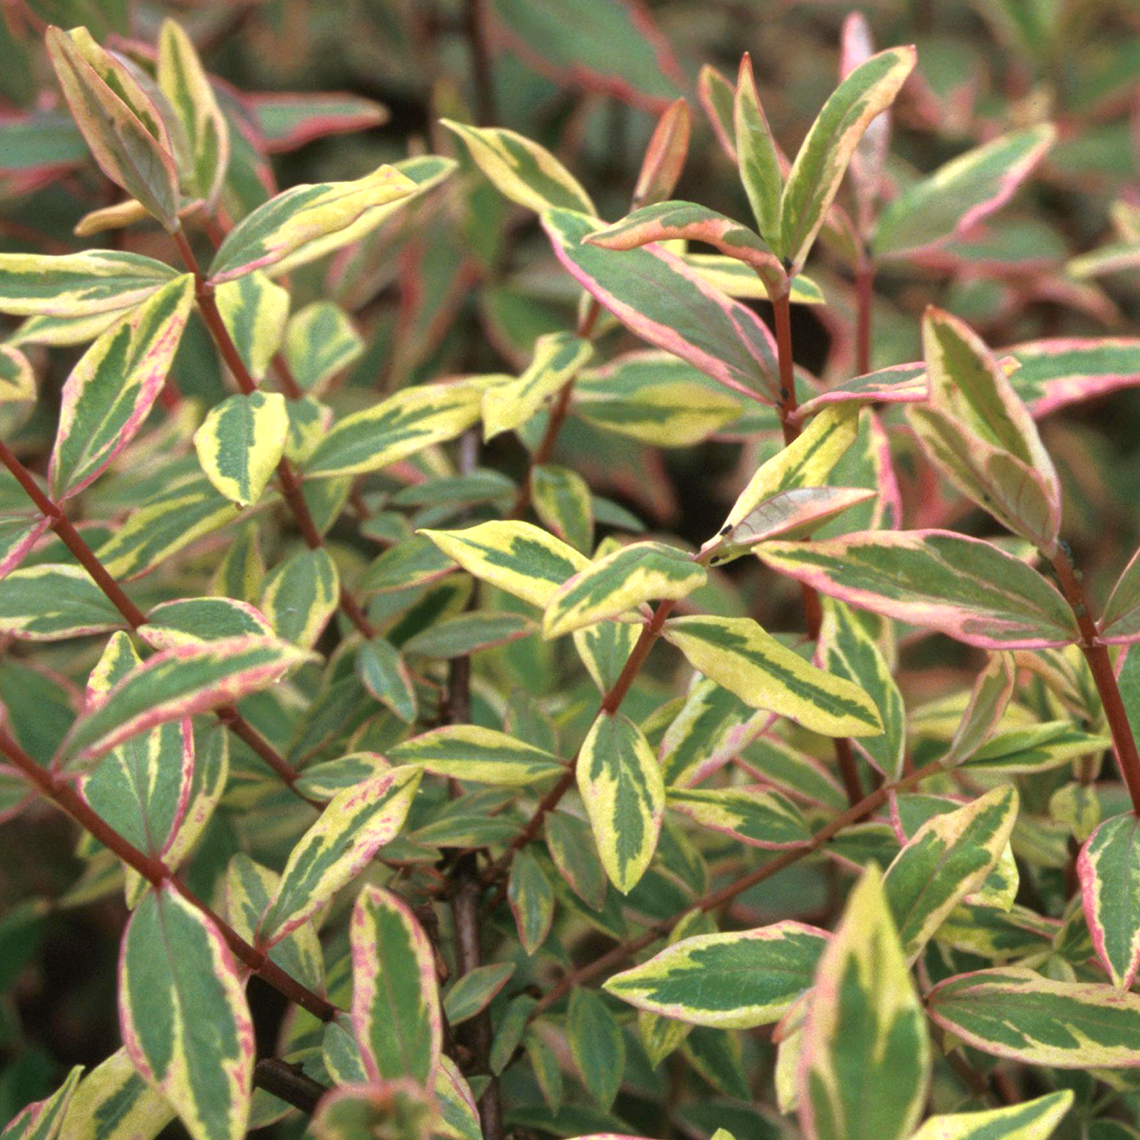 The unusual green yellow and pink variegated foliage of Tricolor hypericum